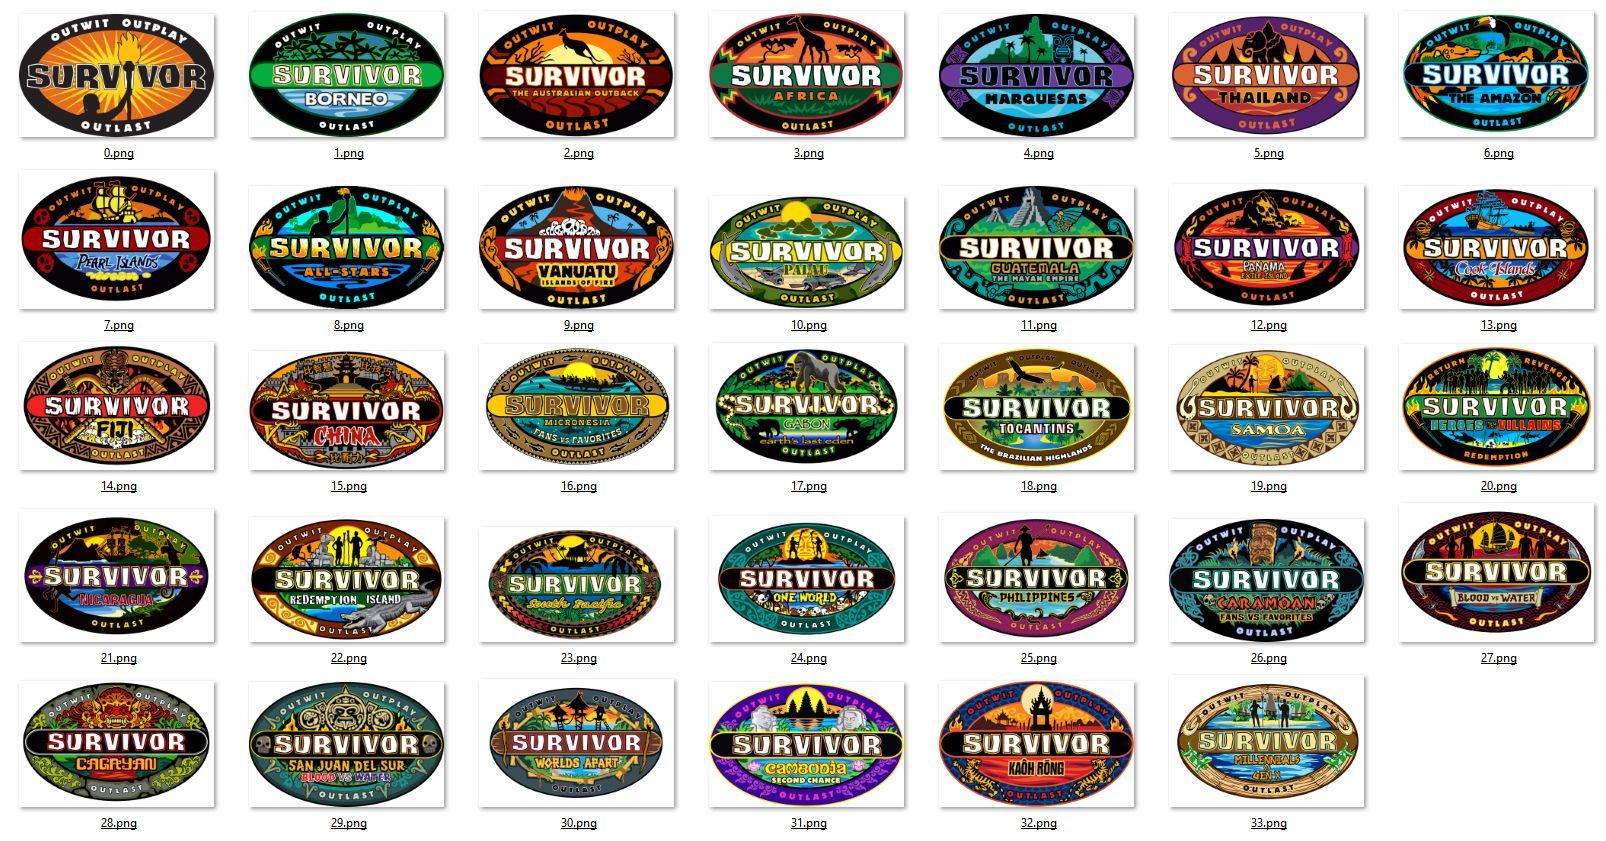 Survivor Logo - What sites are logos sourced from? Also, Survivor logos in here